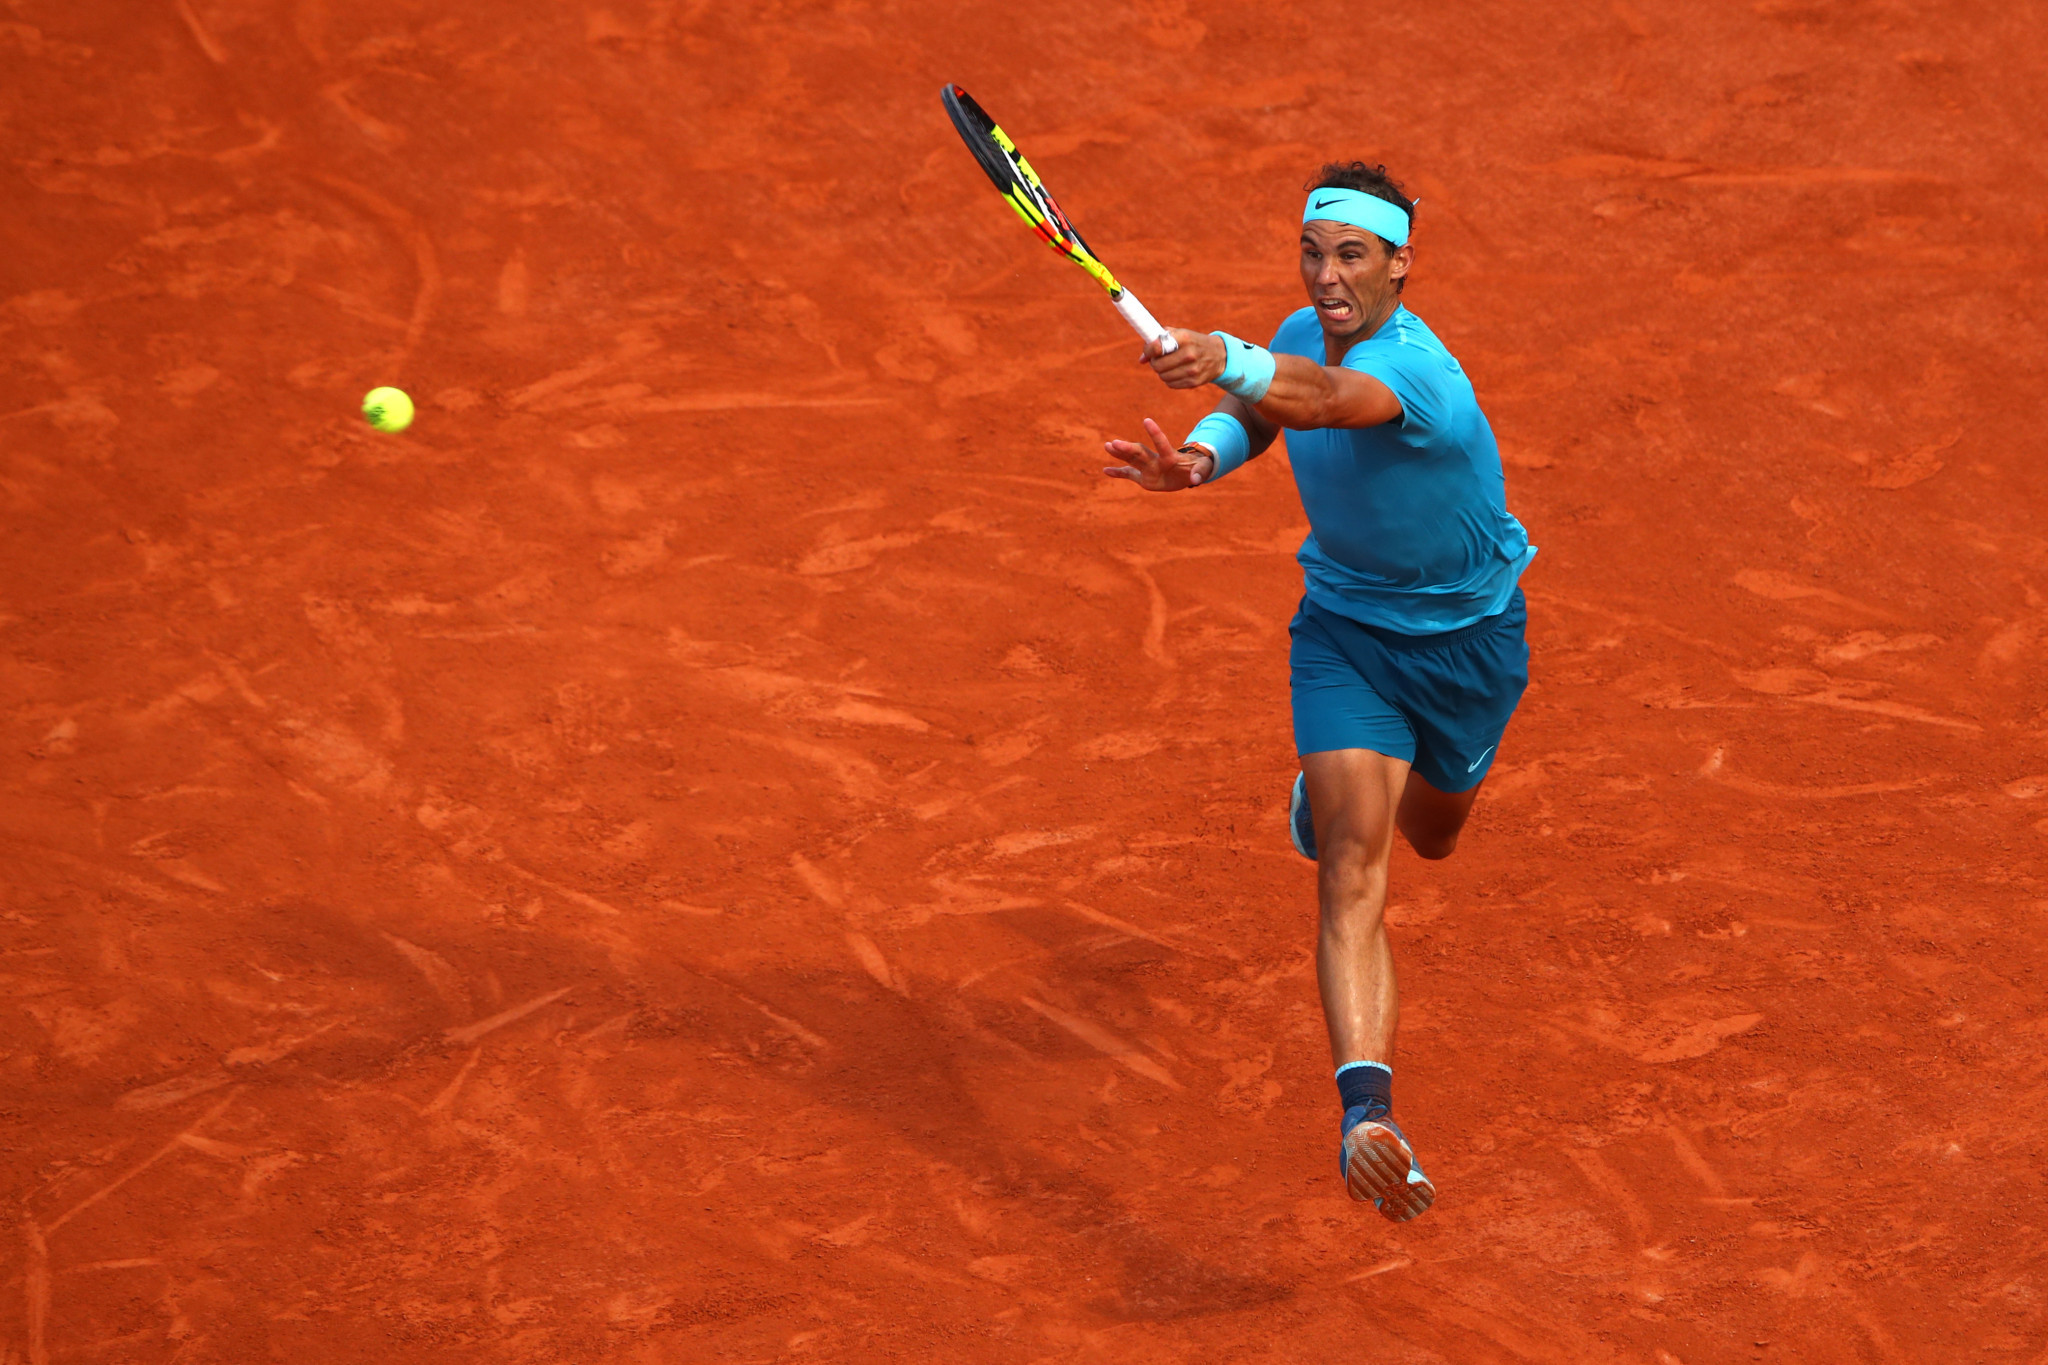 Nadal beats Thiem in straight sets to clinch 11th French Open title